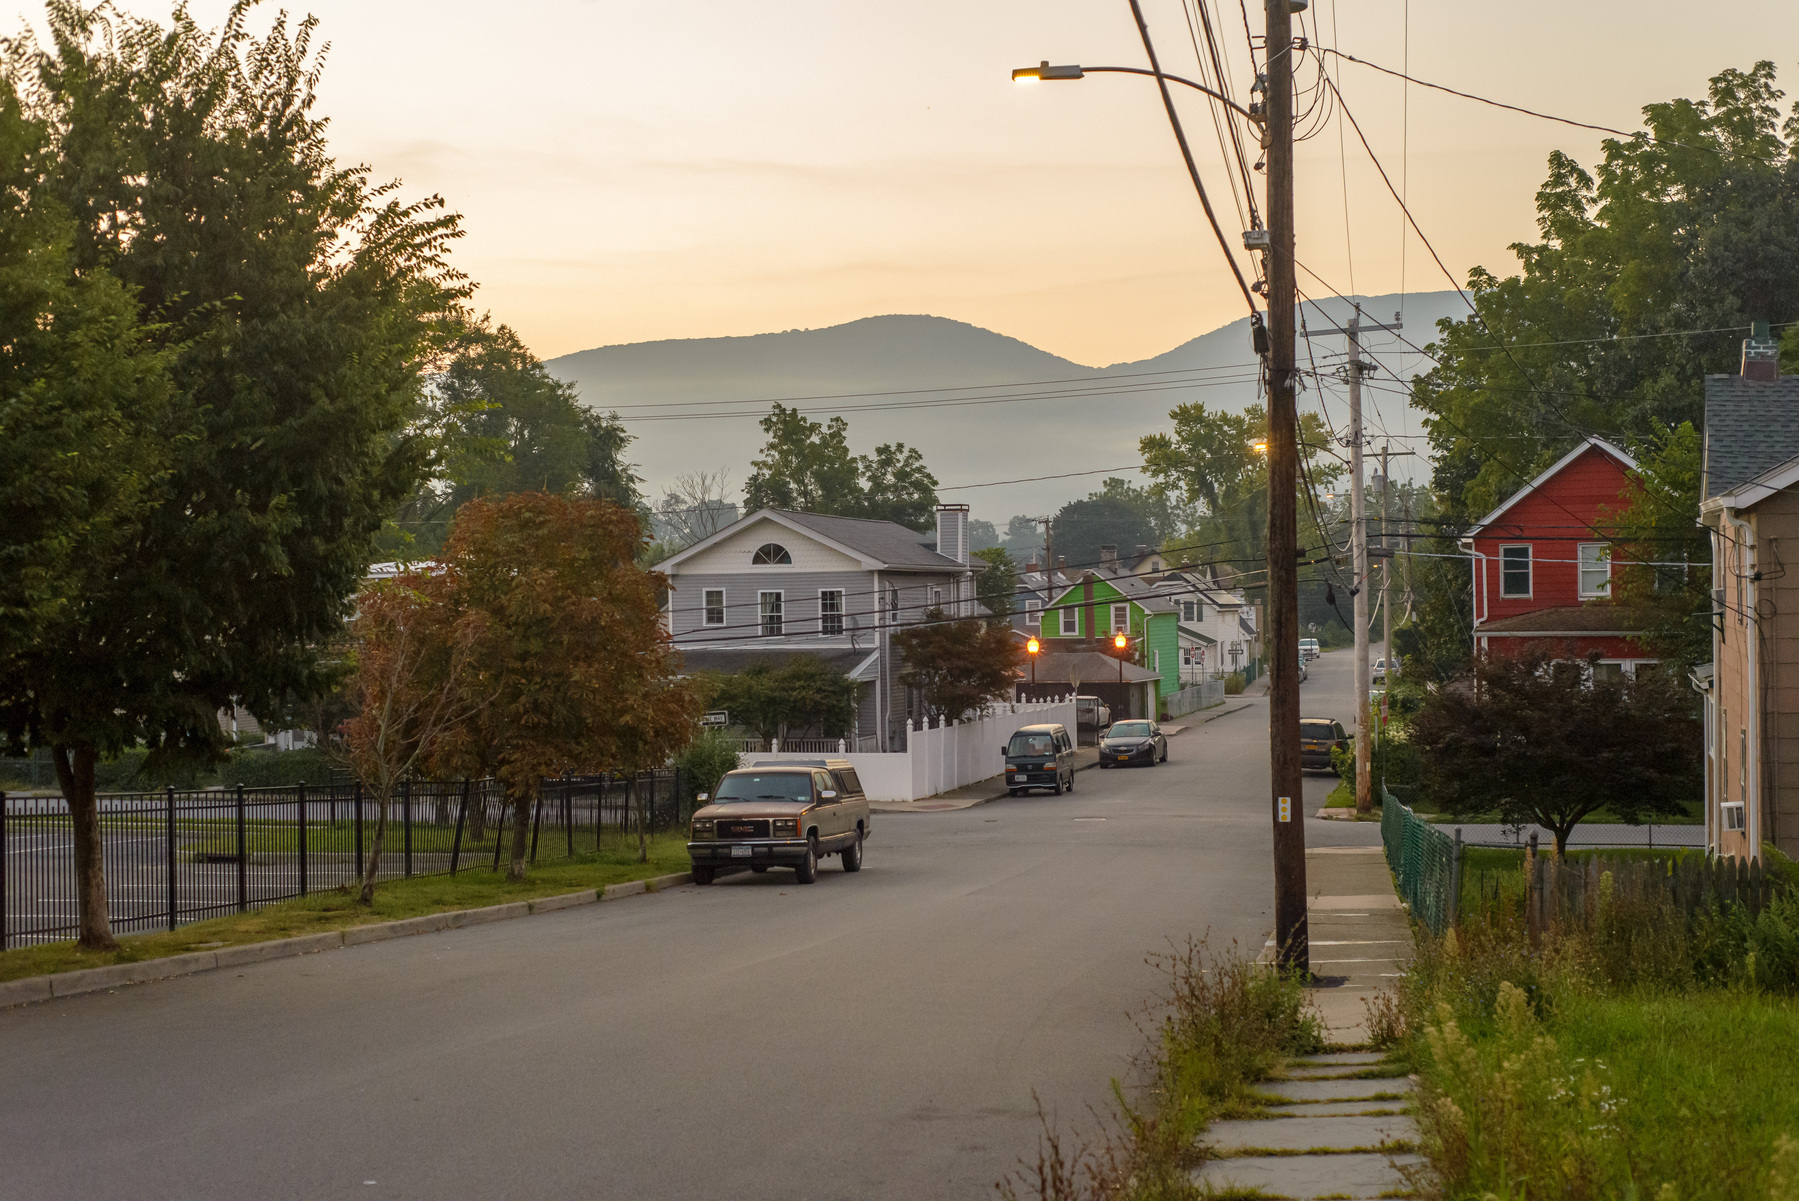 Streetscape with trees, cars, utility wires and mountains in the background. Early morning.